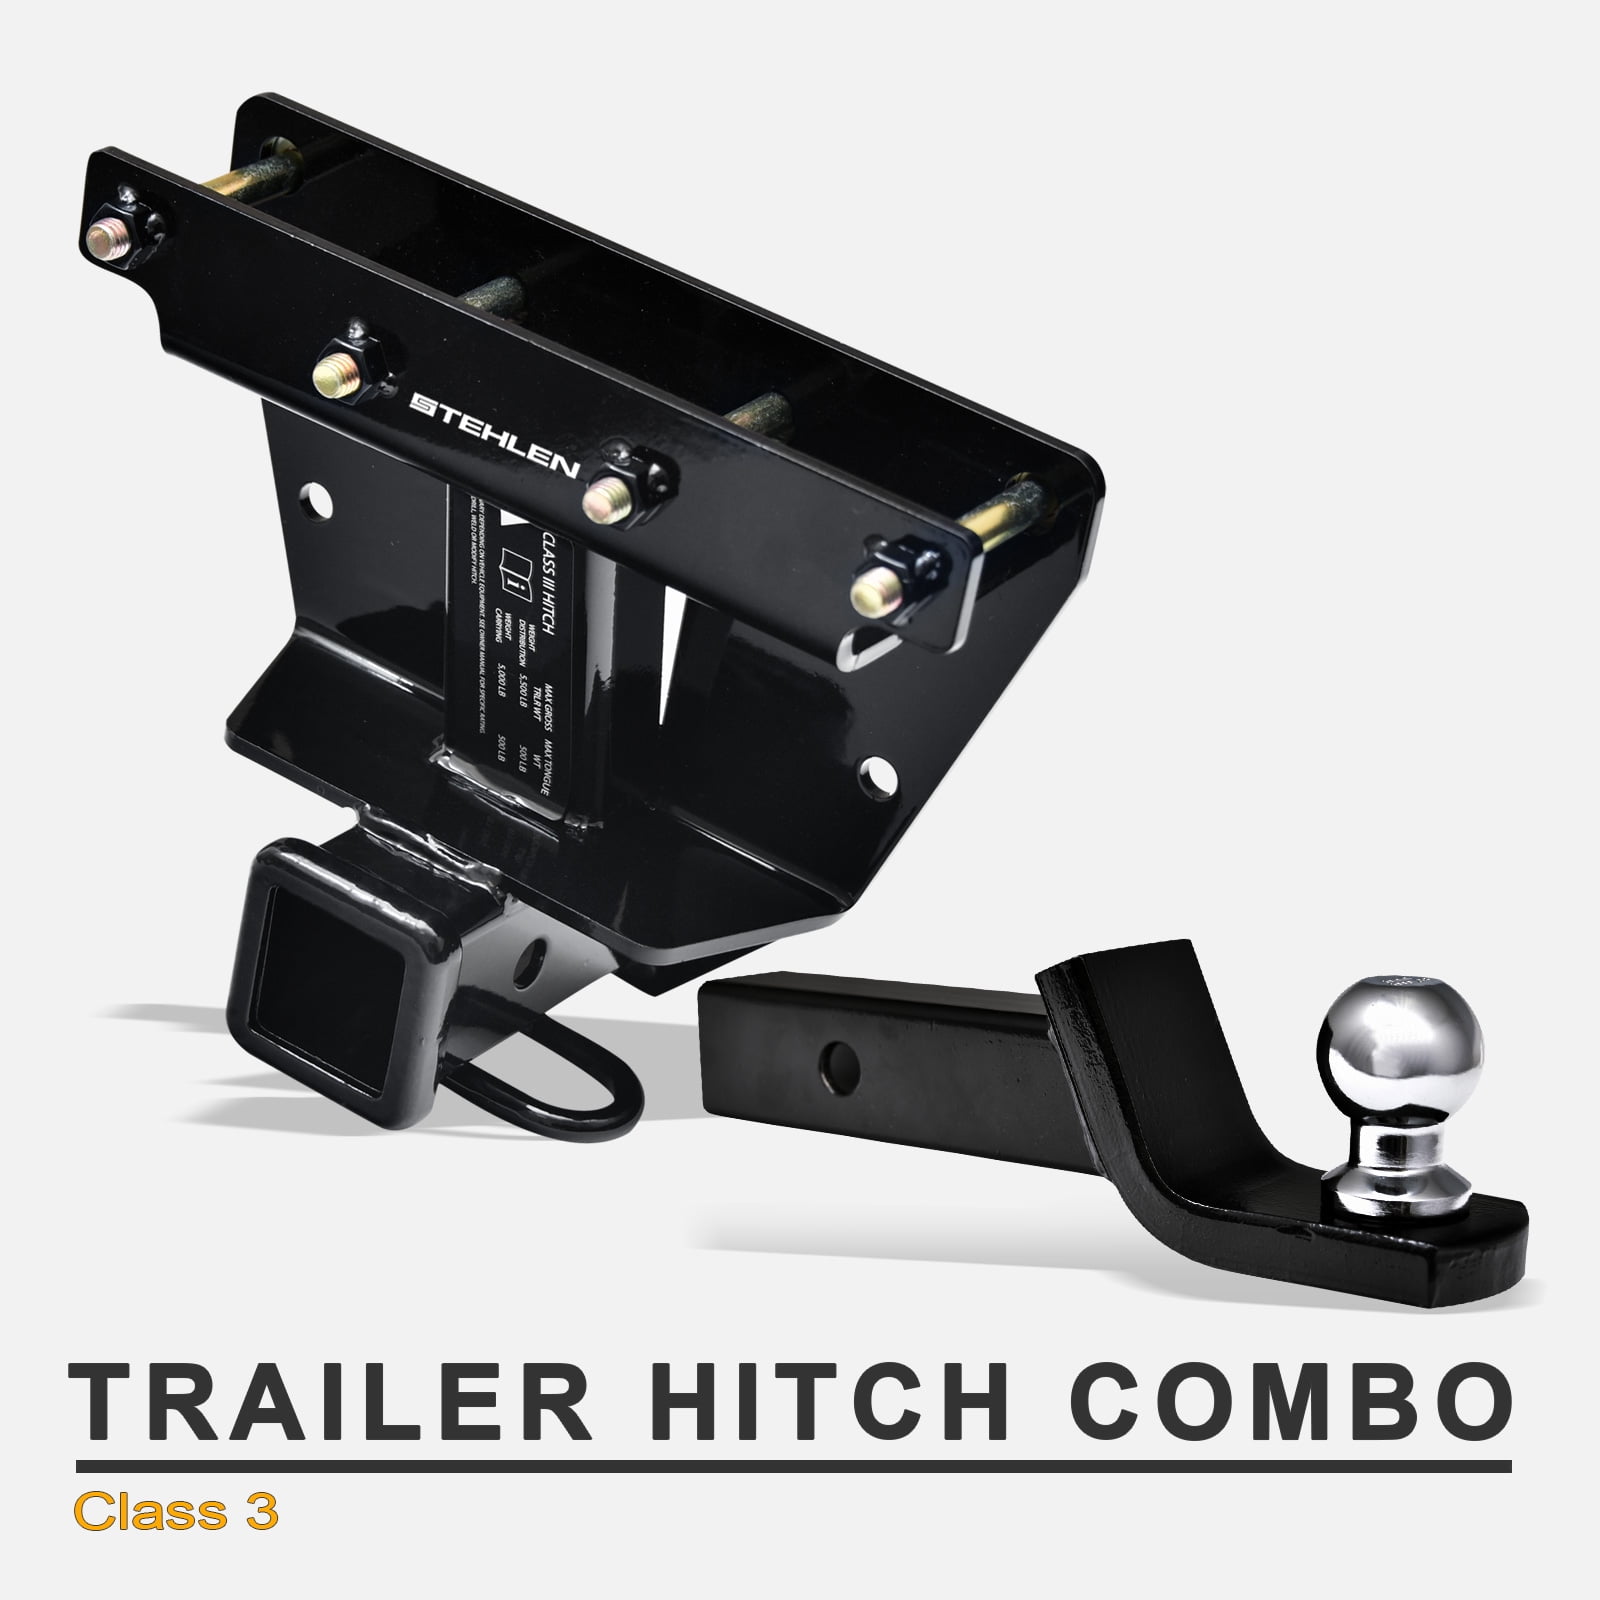 Stehlen 733469492061 Class 3 Trailer Hitch Receiver 2" with Loaded Ball 2005 Jeep Grand Cherokee Trailer Hitch